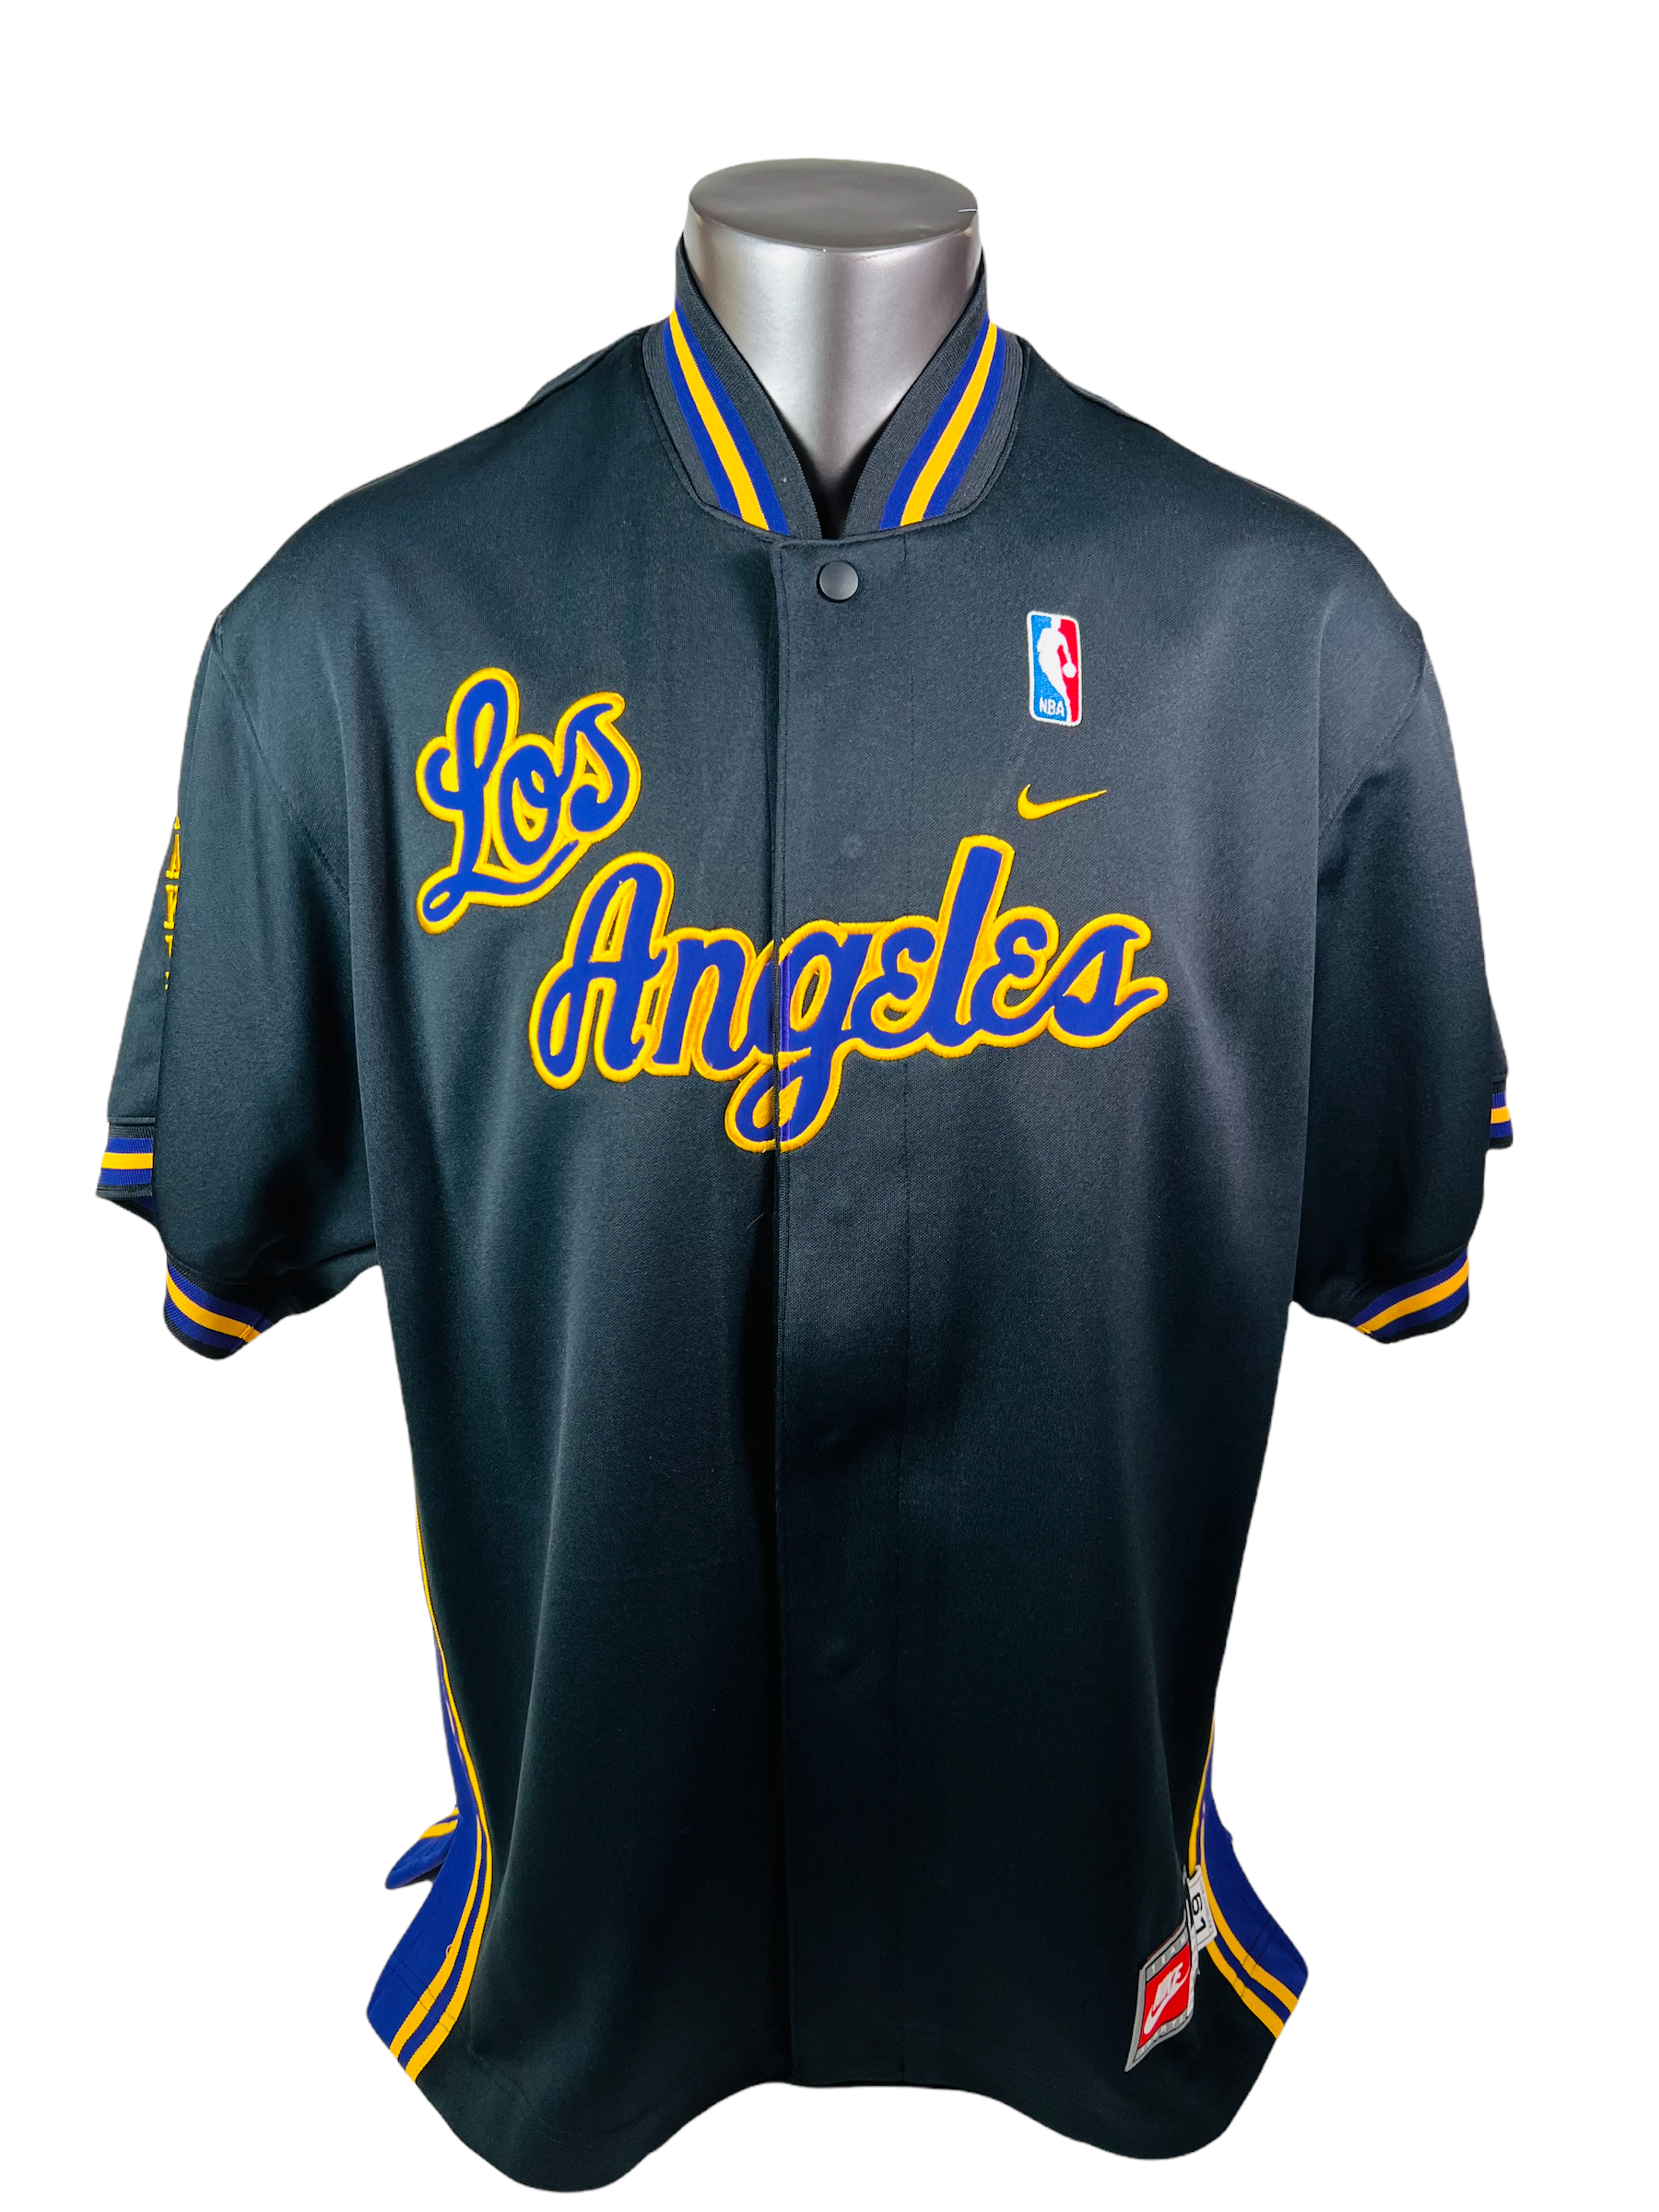 Official Los Angeles Lakers Throwback Jerseys, Retro Jersey